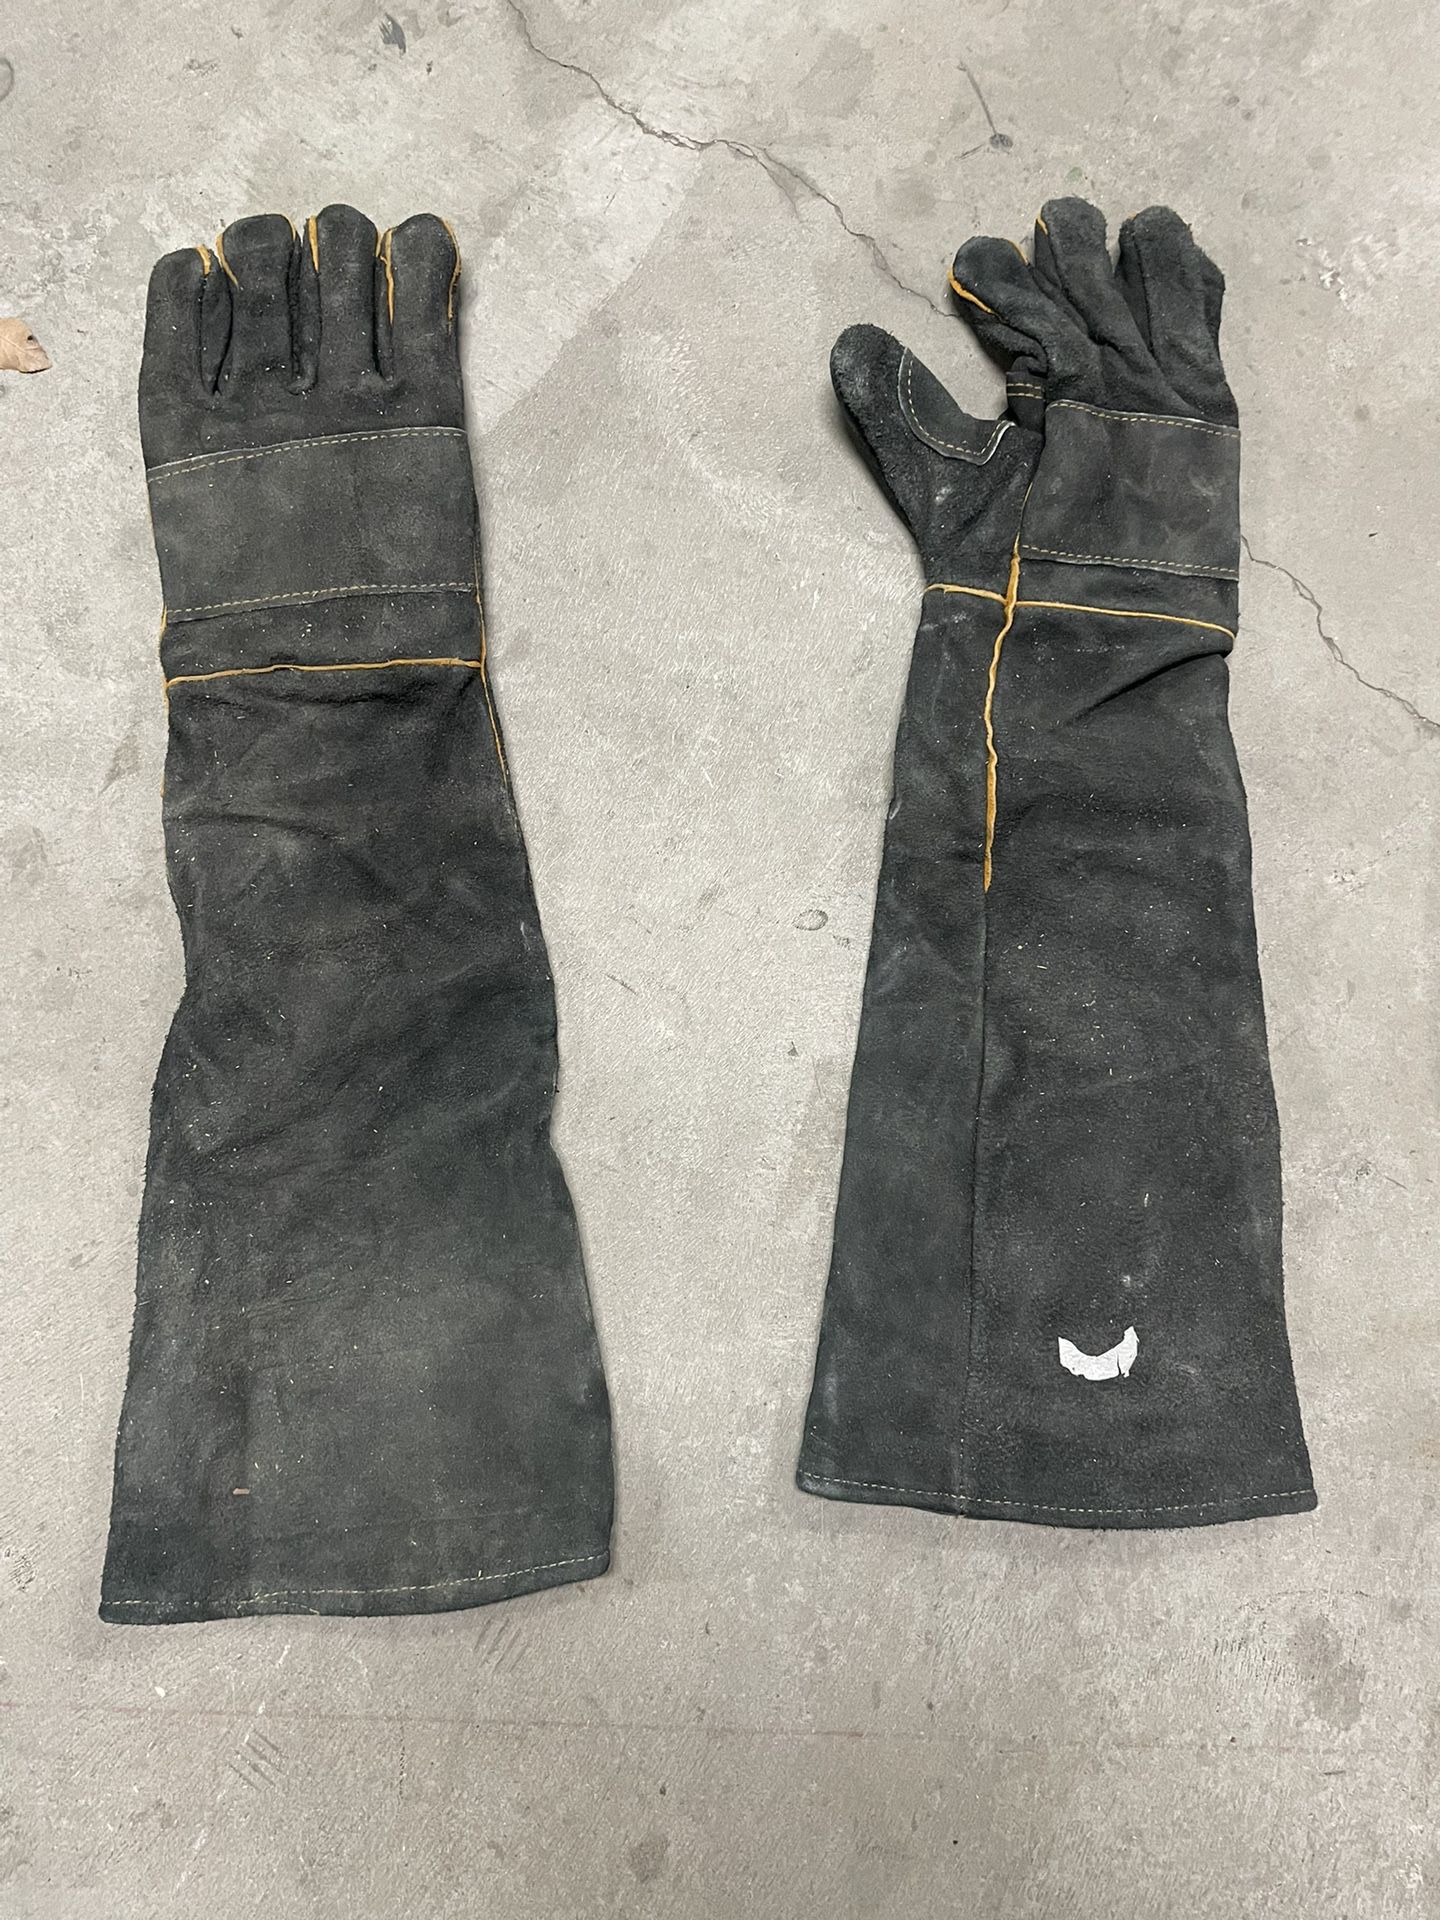 welders gloves very good condition. pick up only. as is. $15